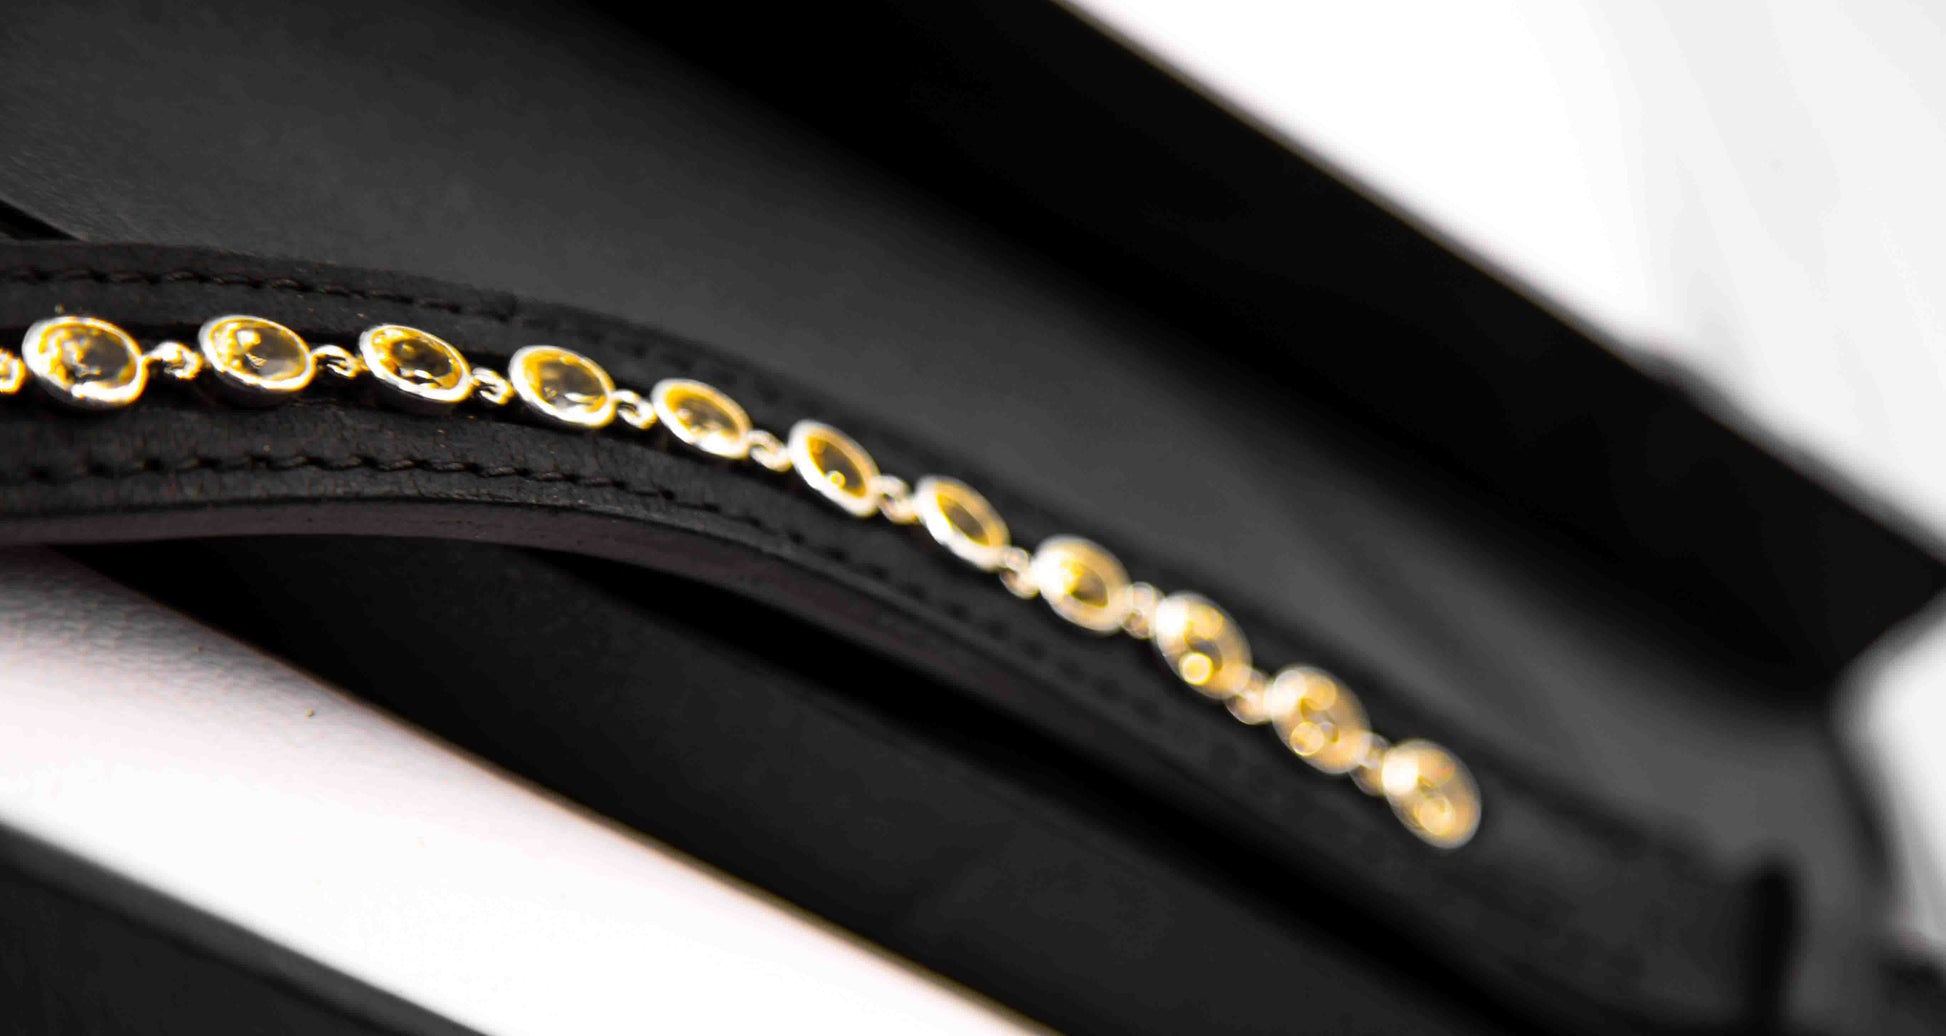 Citrine Browband - MP Equestrian 